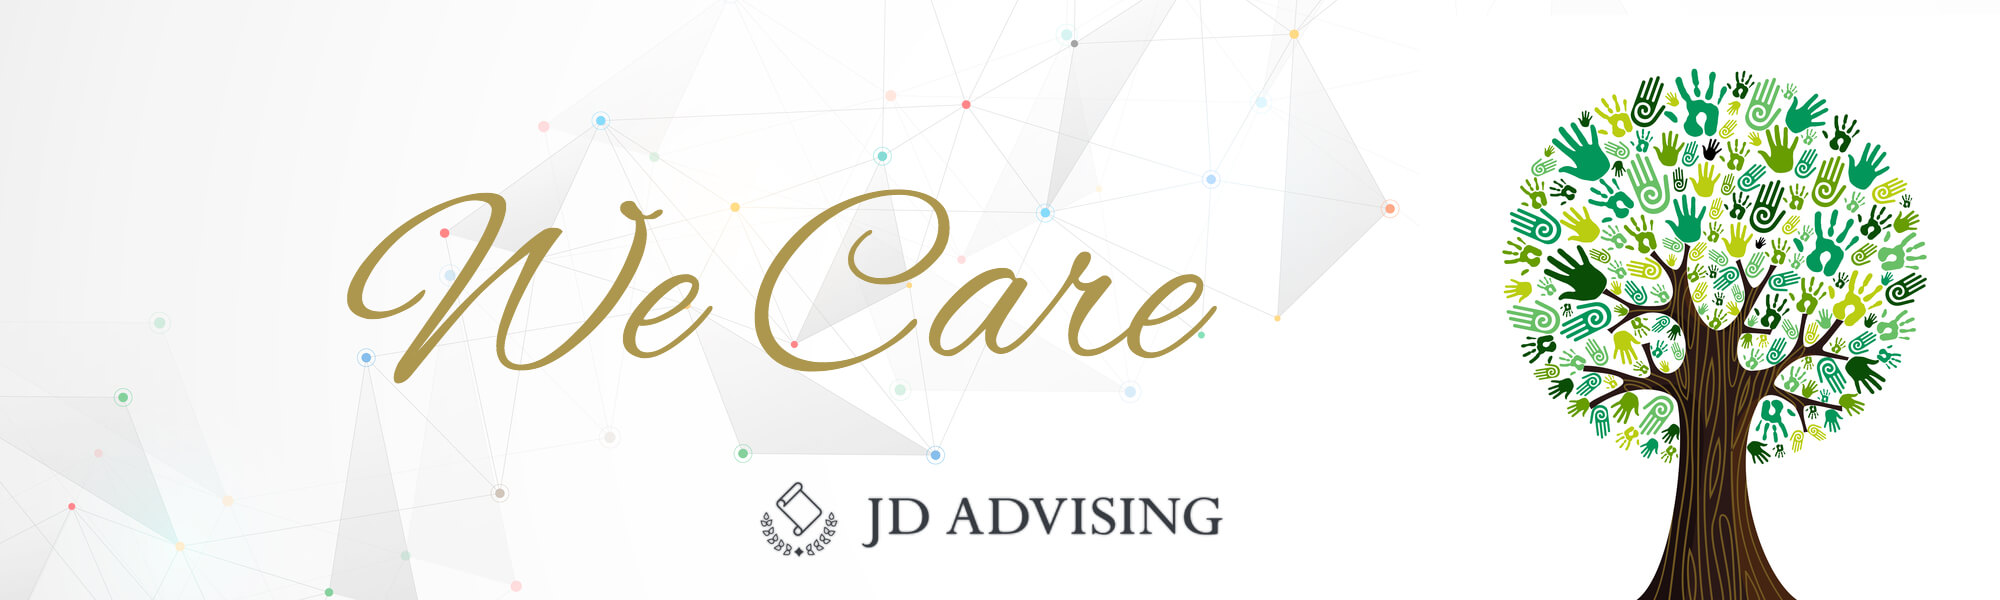 giving back, we care, jd advising